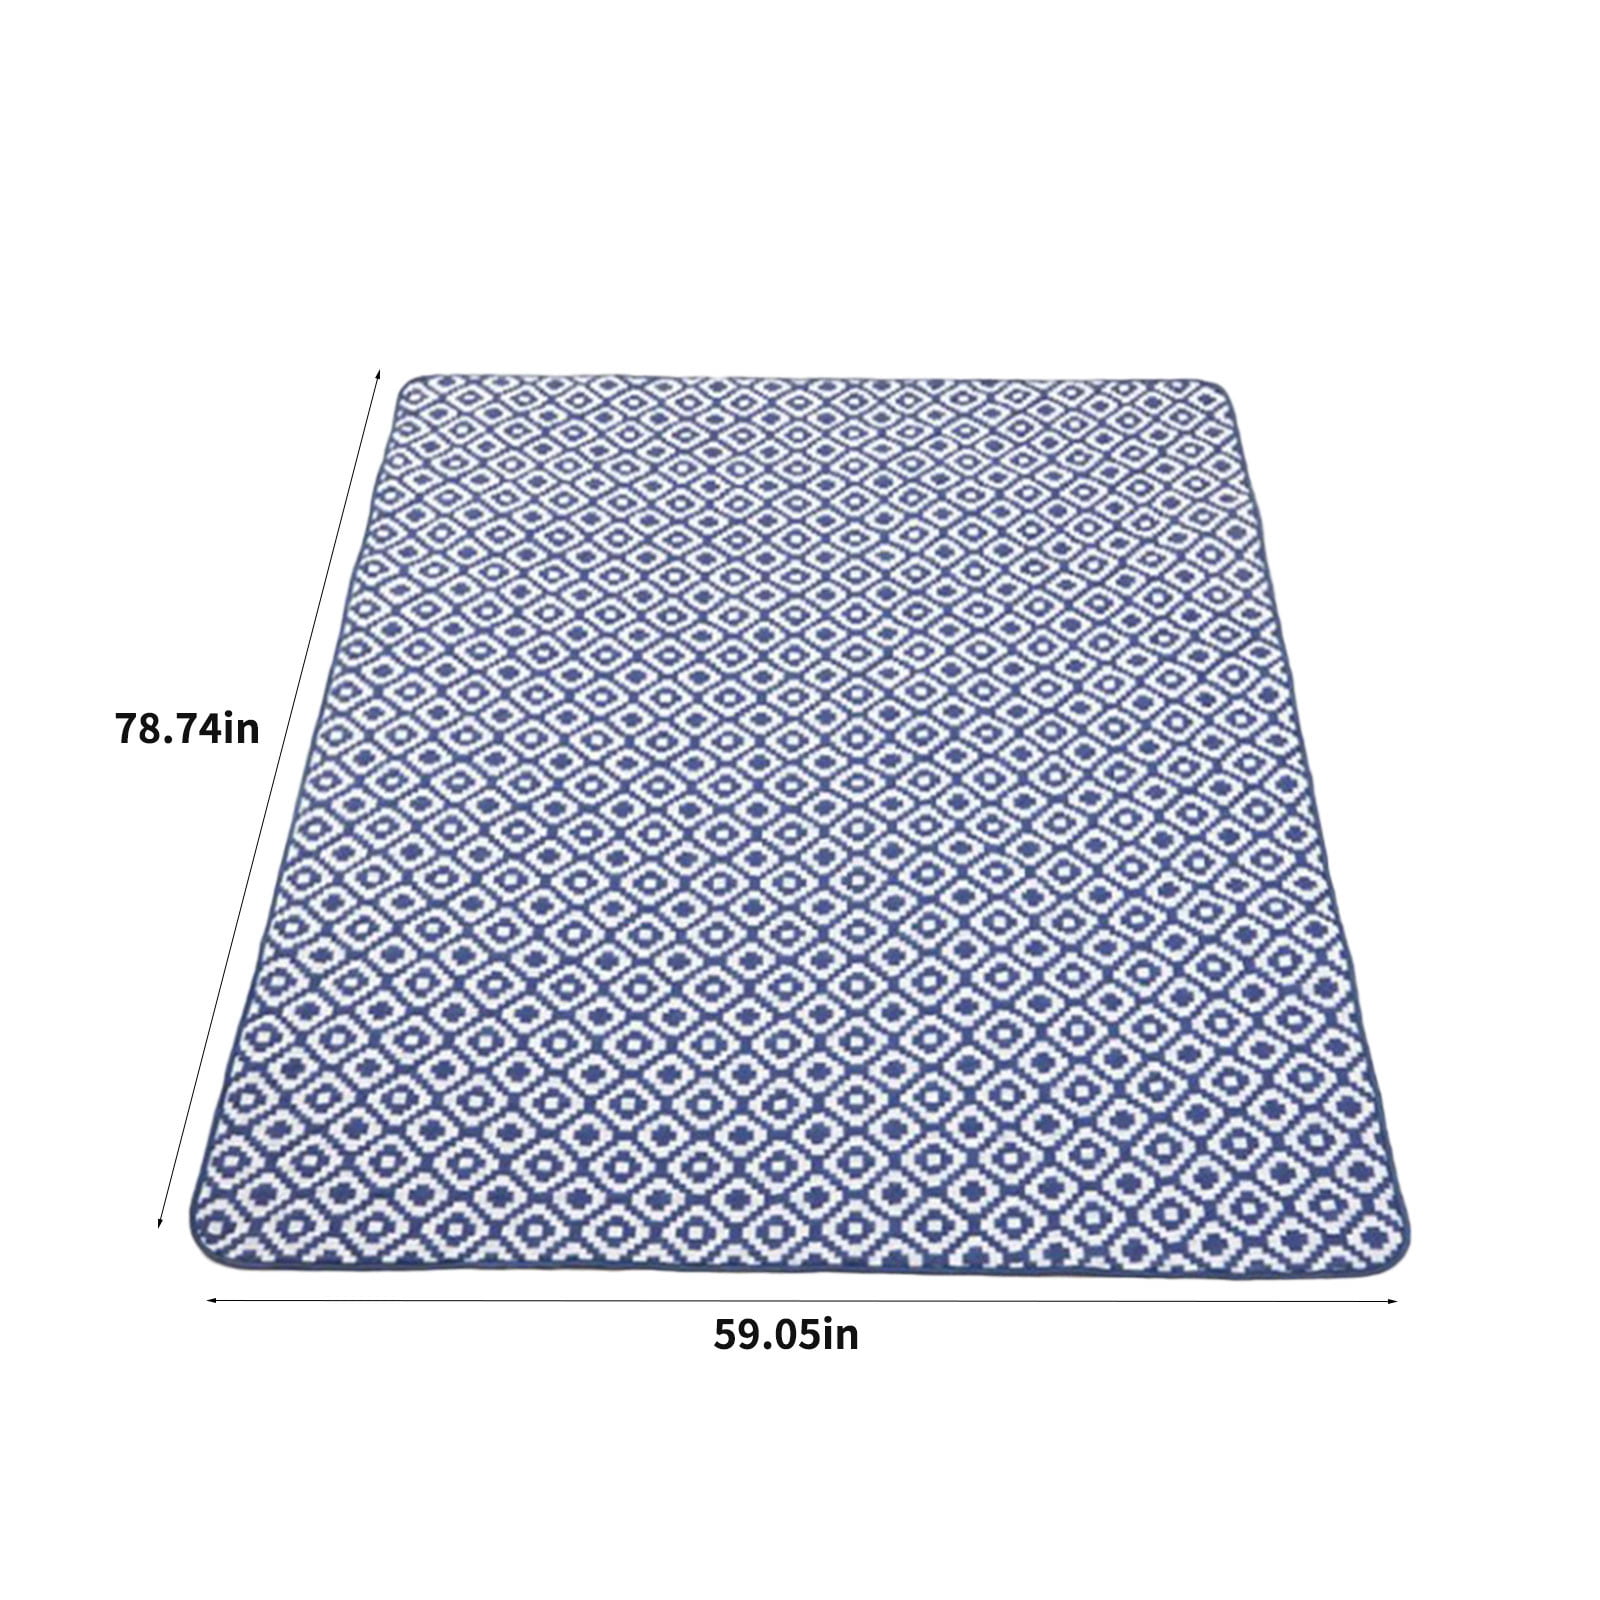 Esla Picnic Blanket, Waterproof Foldable, in Large 80x60in and Extra Large 80x80in, Cute Gingham Picnic Blanket, Portable Compact Beach Blanket